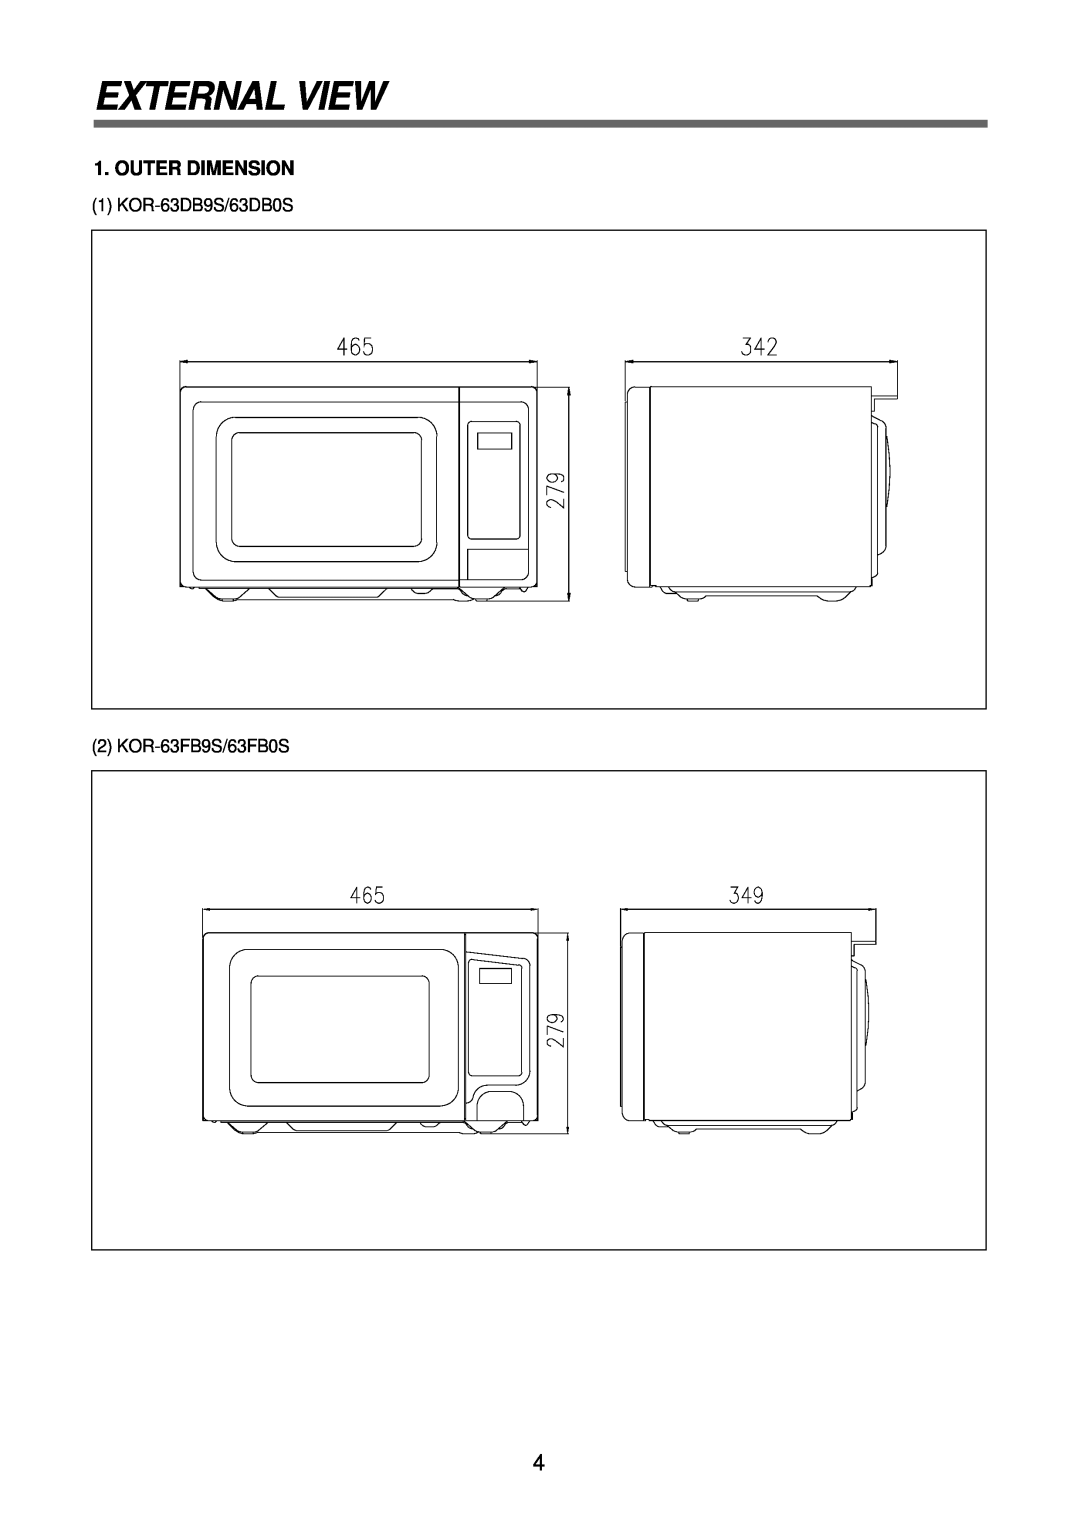 Daewoo KOR-63FB9S, KOR-63FB0S, KOR-63DB9S, KOR-63DB0S service manual External View, Outer Dimension 